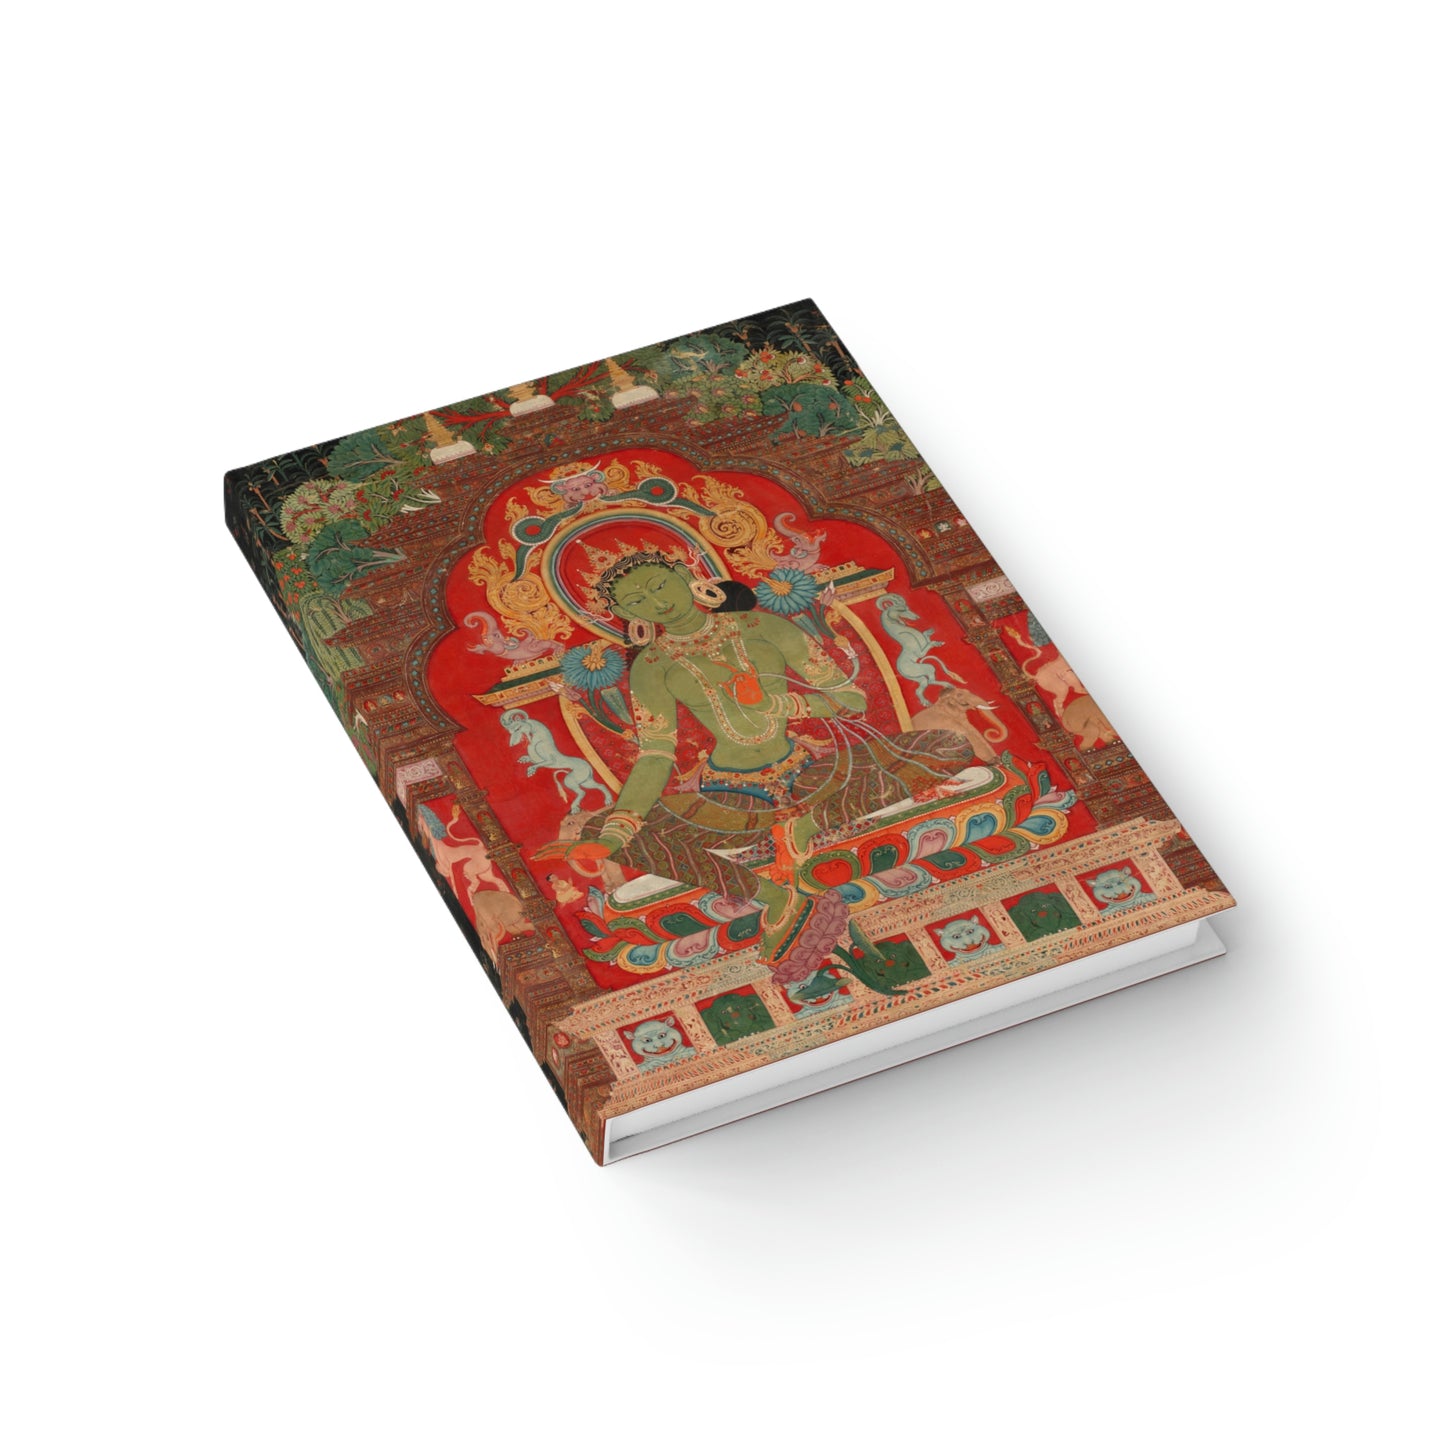 Green Tara, emanation of Compassion Journal - Ruled Line